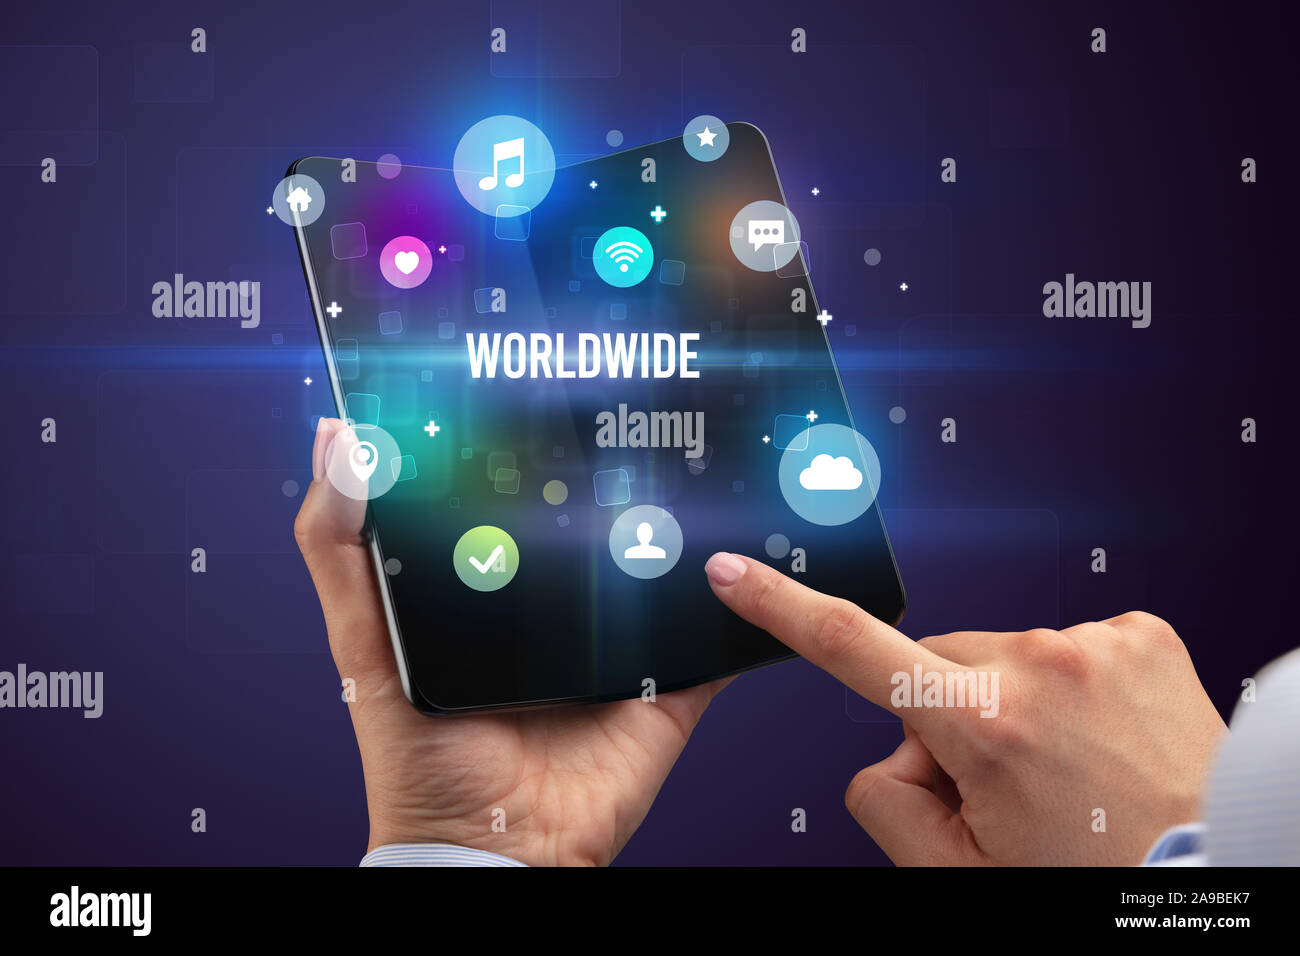 Businessman holding a foldable smartphone with WORLDWIDE inscription, social media concept Stock Photo